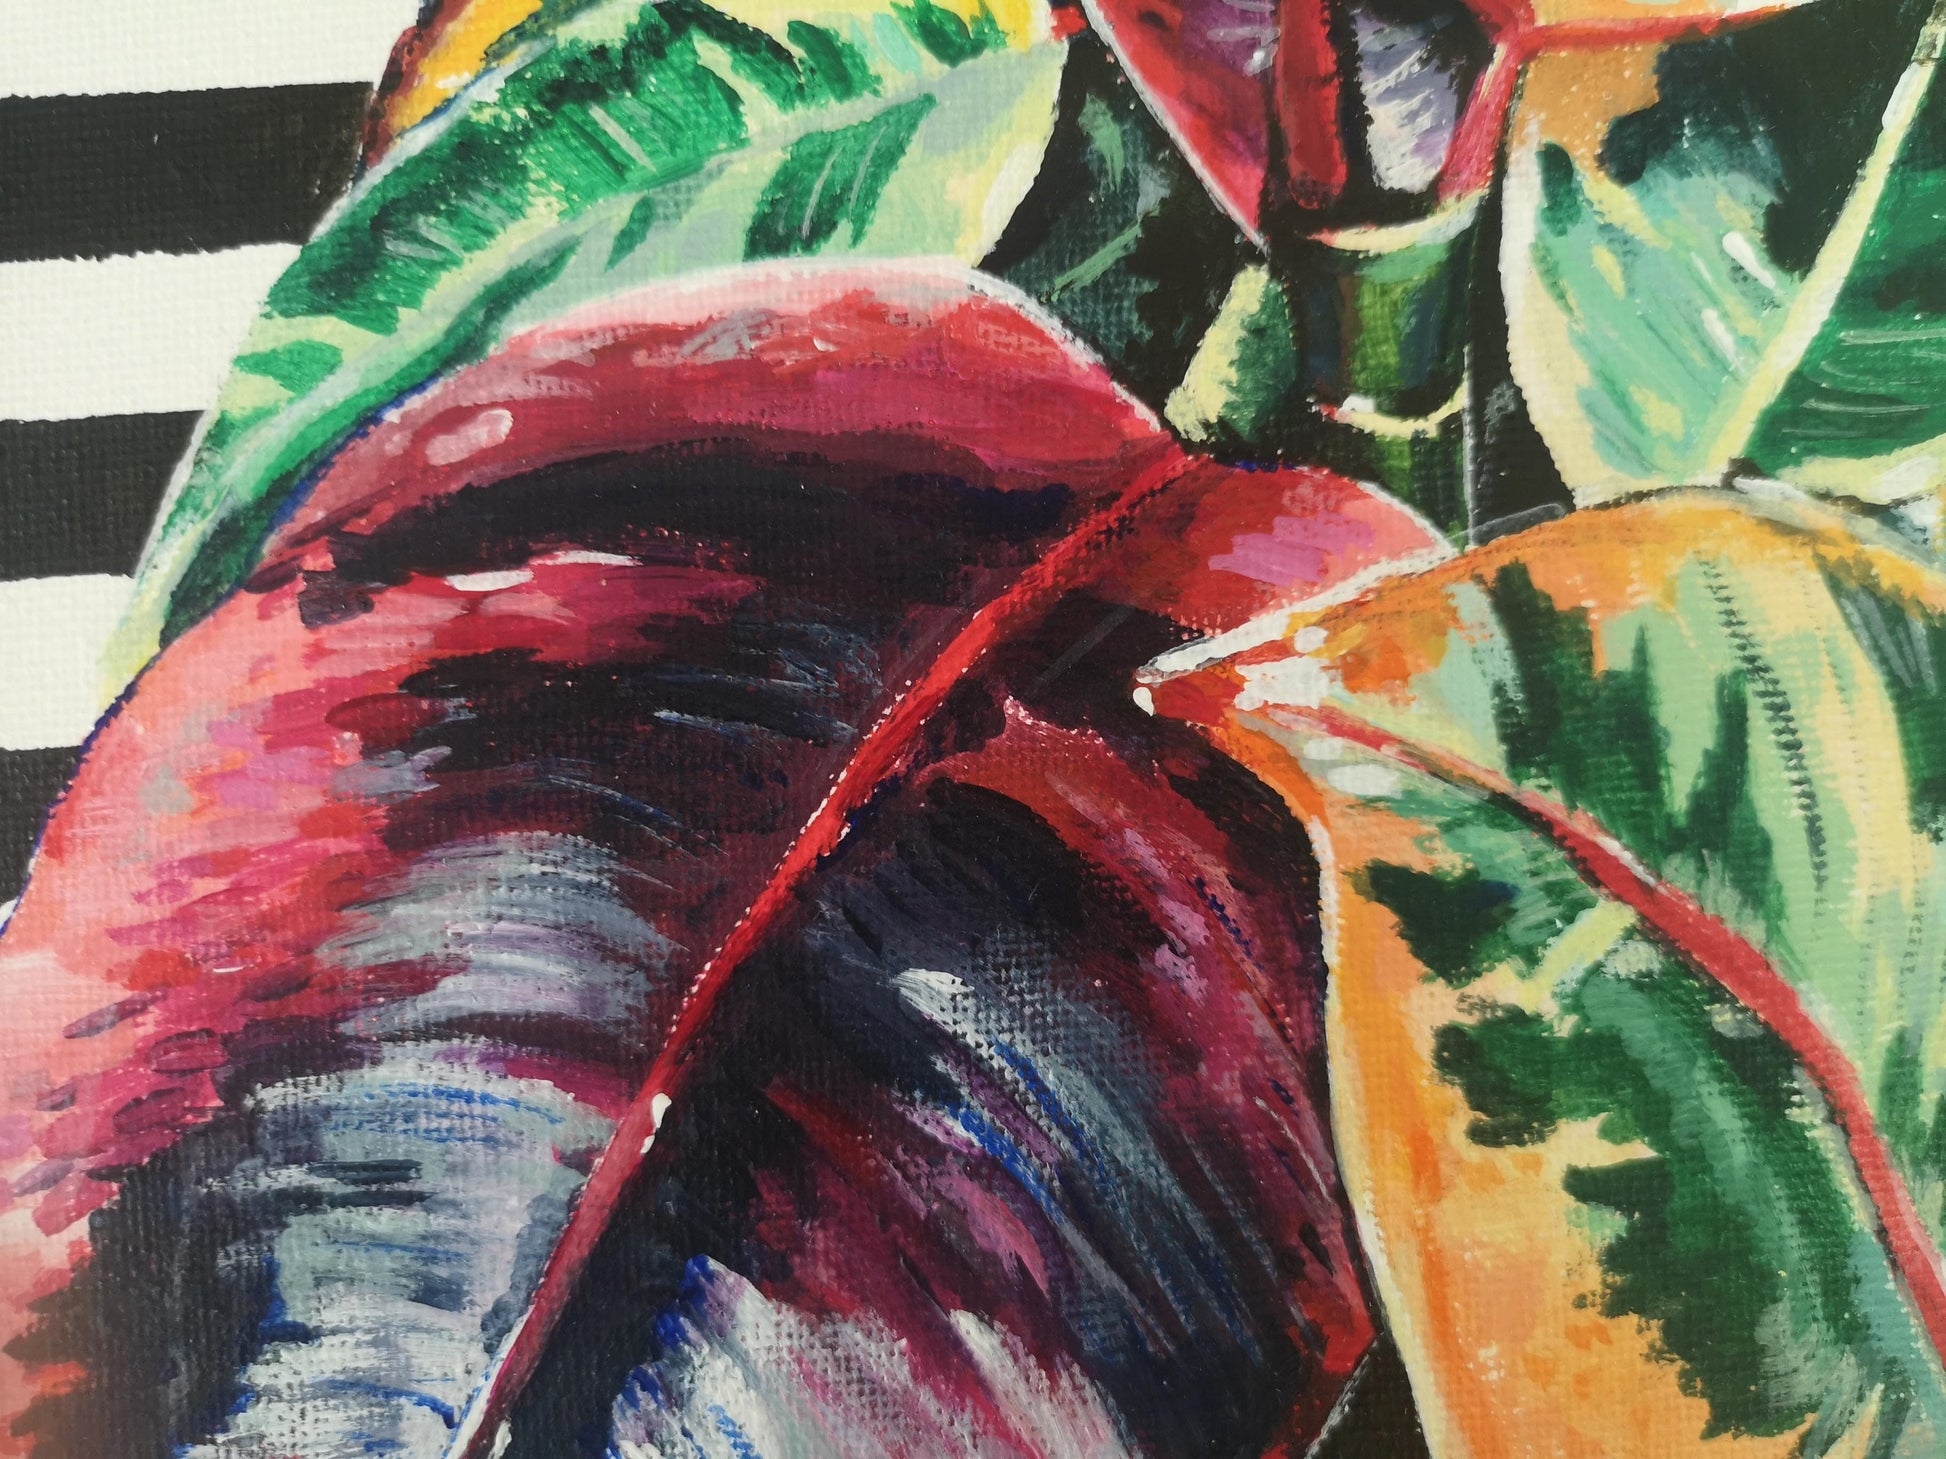 Plant painting of rubber fig. Close up of the leaves and stripy background details. Artwork by Judy Century.